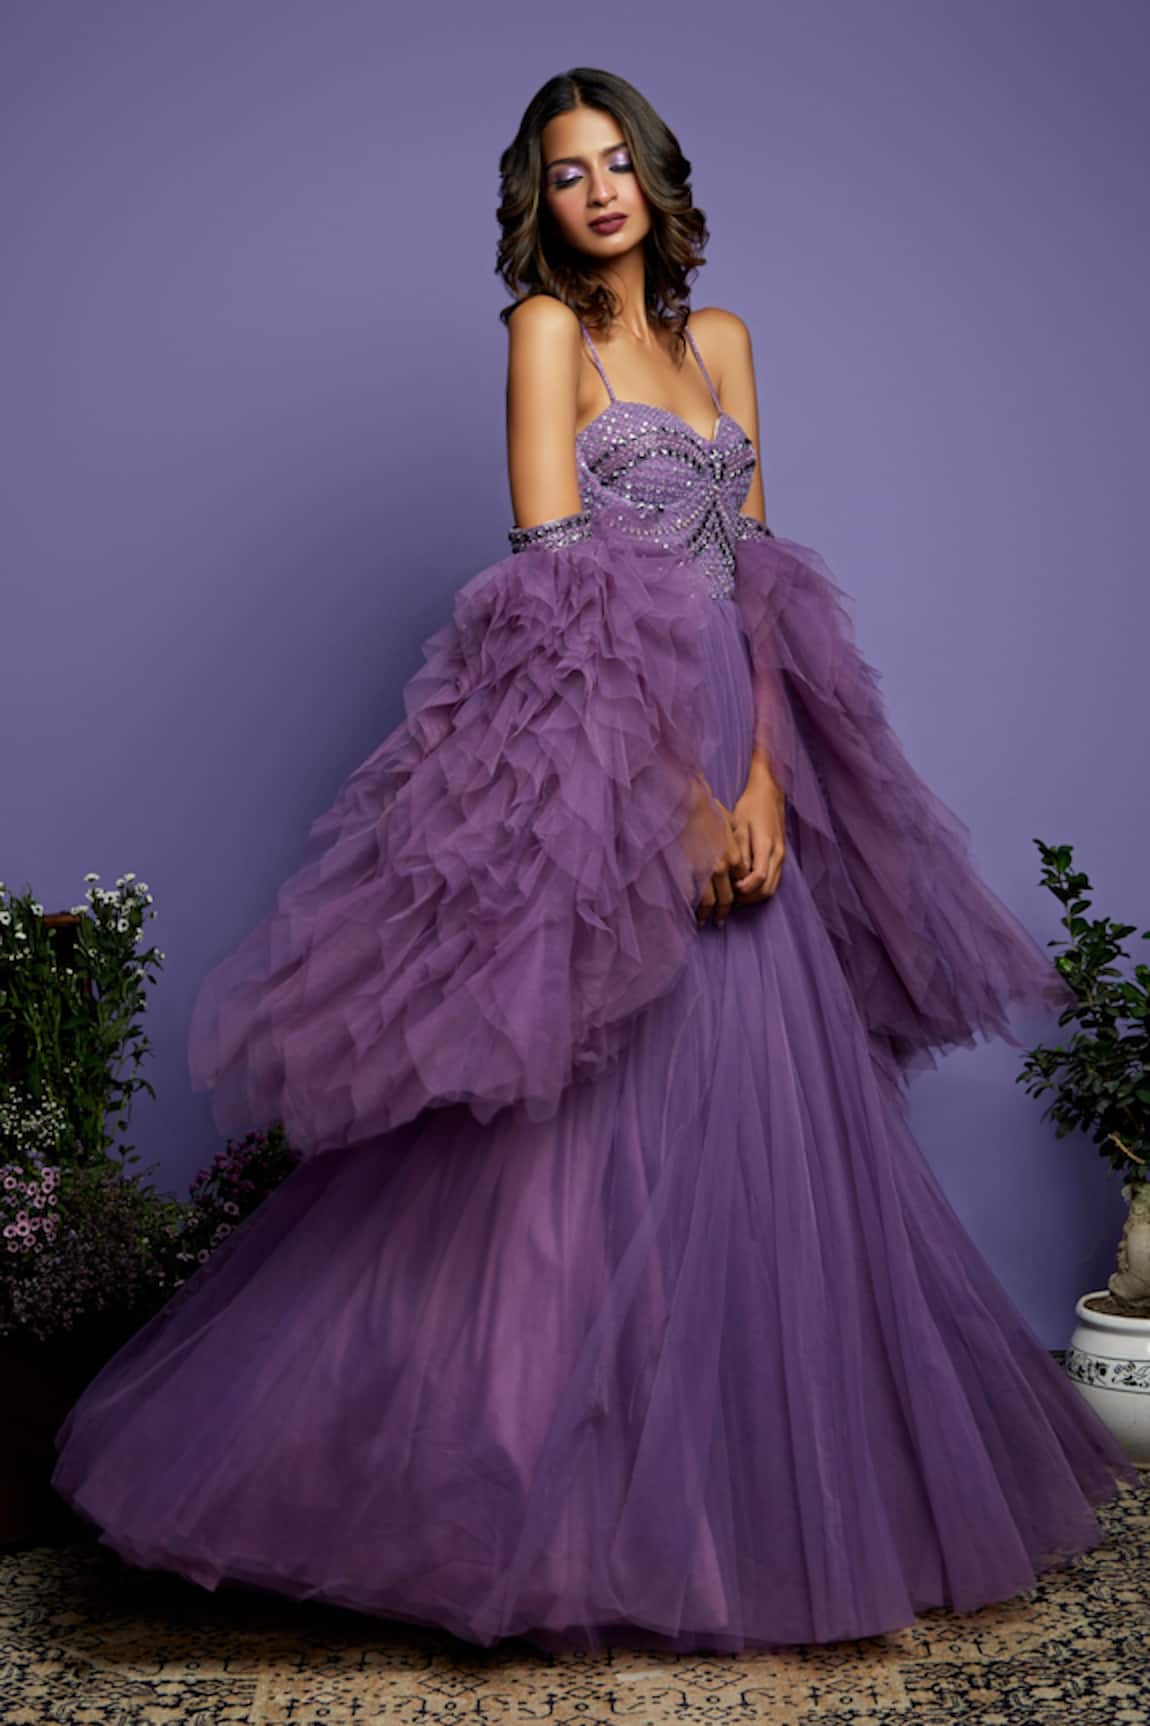 Purple Wedding Dresses: 12 Admirable Styles For Bride | Purple wedding  guest dresses, Purple wedding dress, Colored wedding dresses